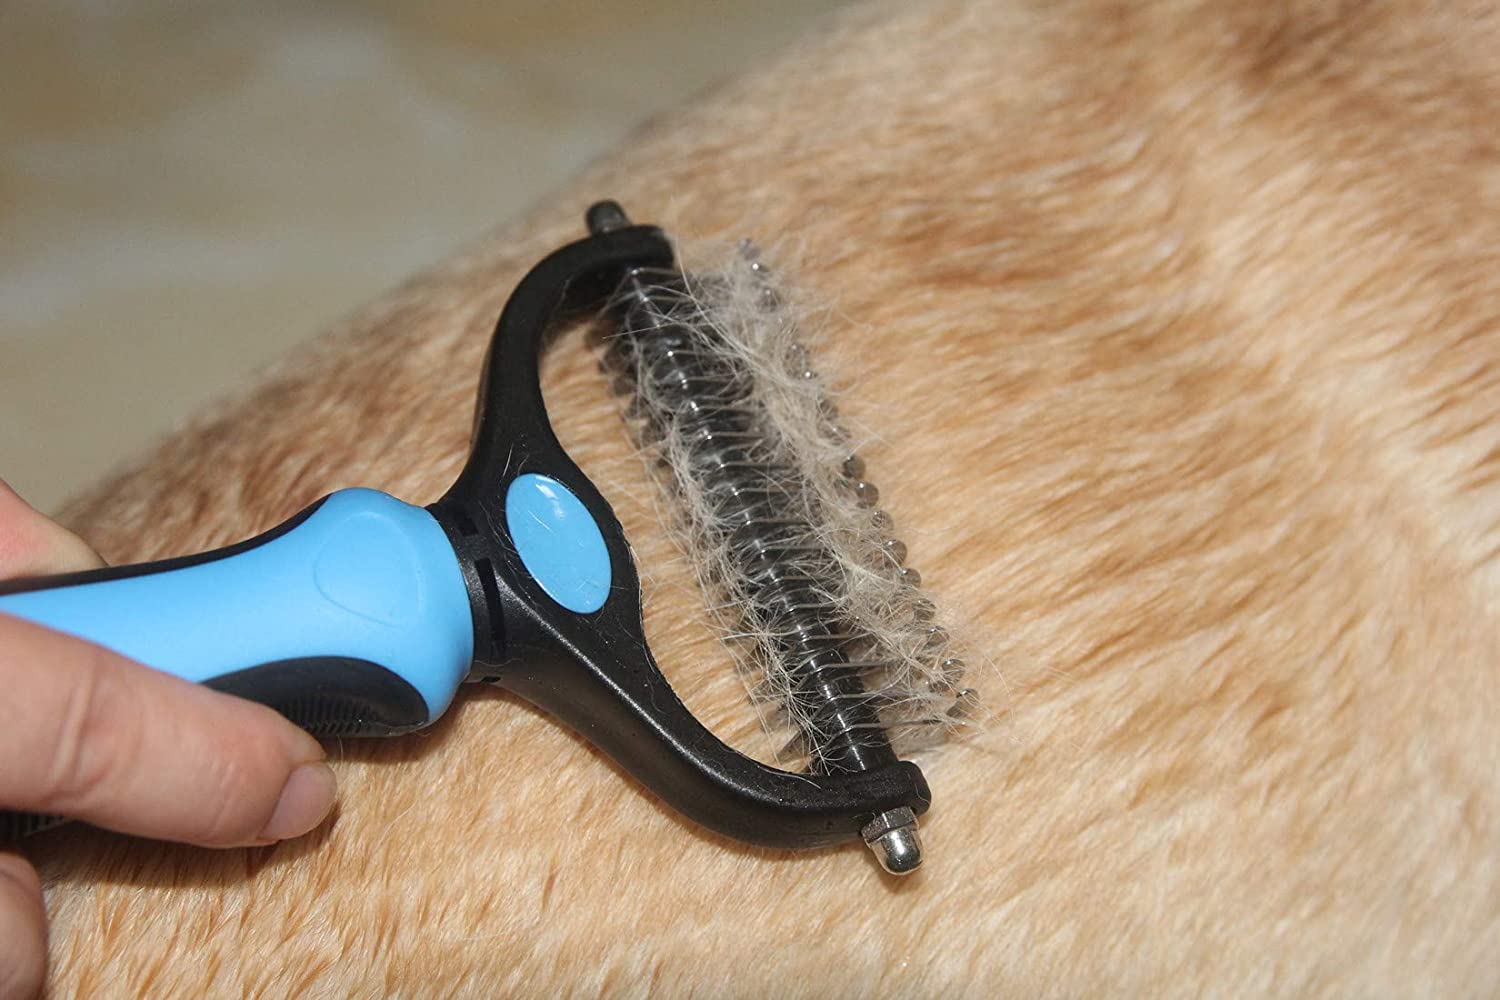 Maxpower Planet Pet Grooming Tool - Dematting and Shedding Brush. - e4cents